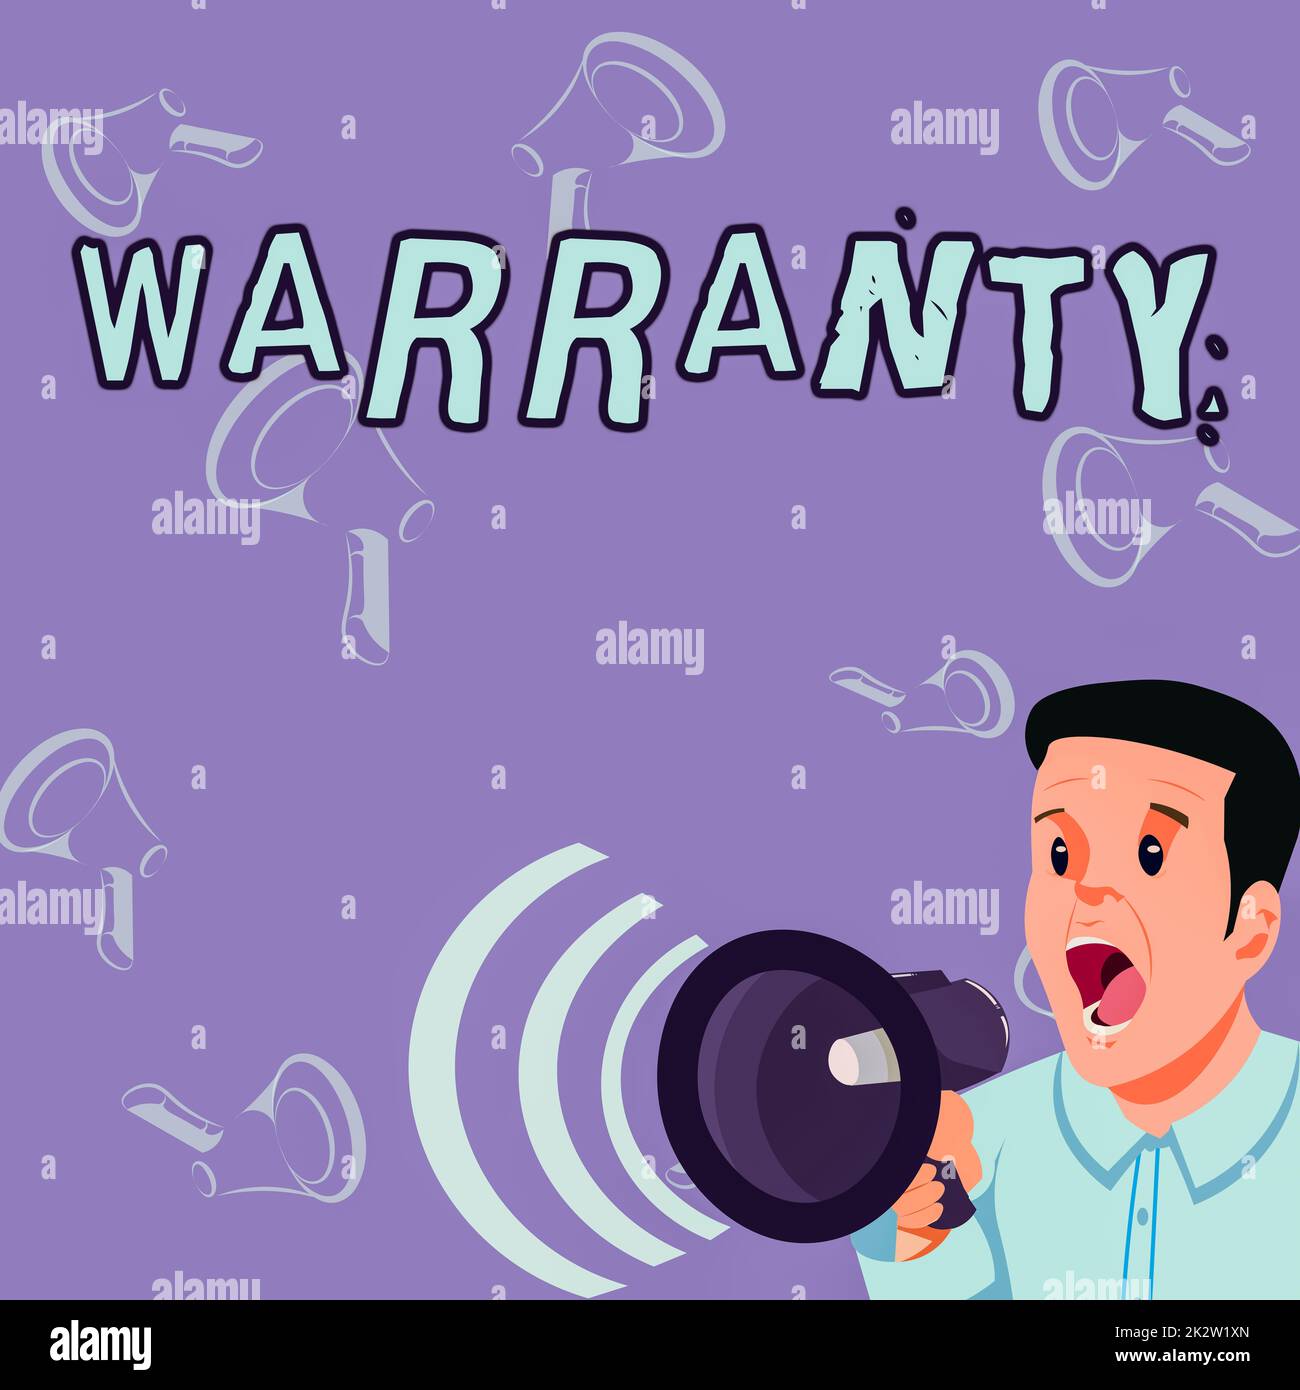 Writing displaying text Warranty. Word Written on Free service of repair and maintenance of the product sold Businessman Talking Through Megaphone Making Wonderful New Announcement Stock Photo